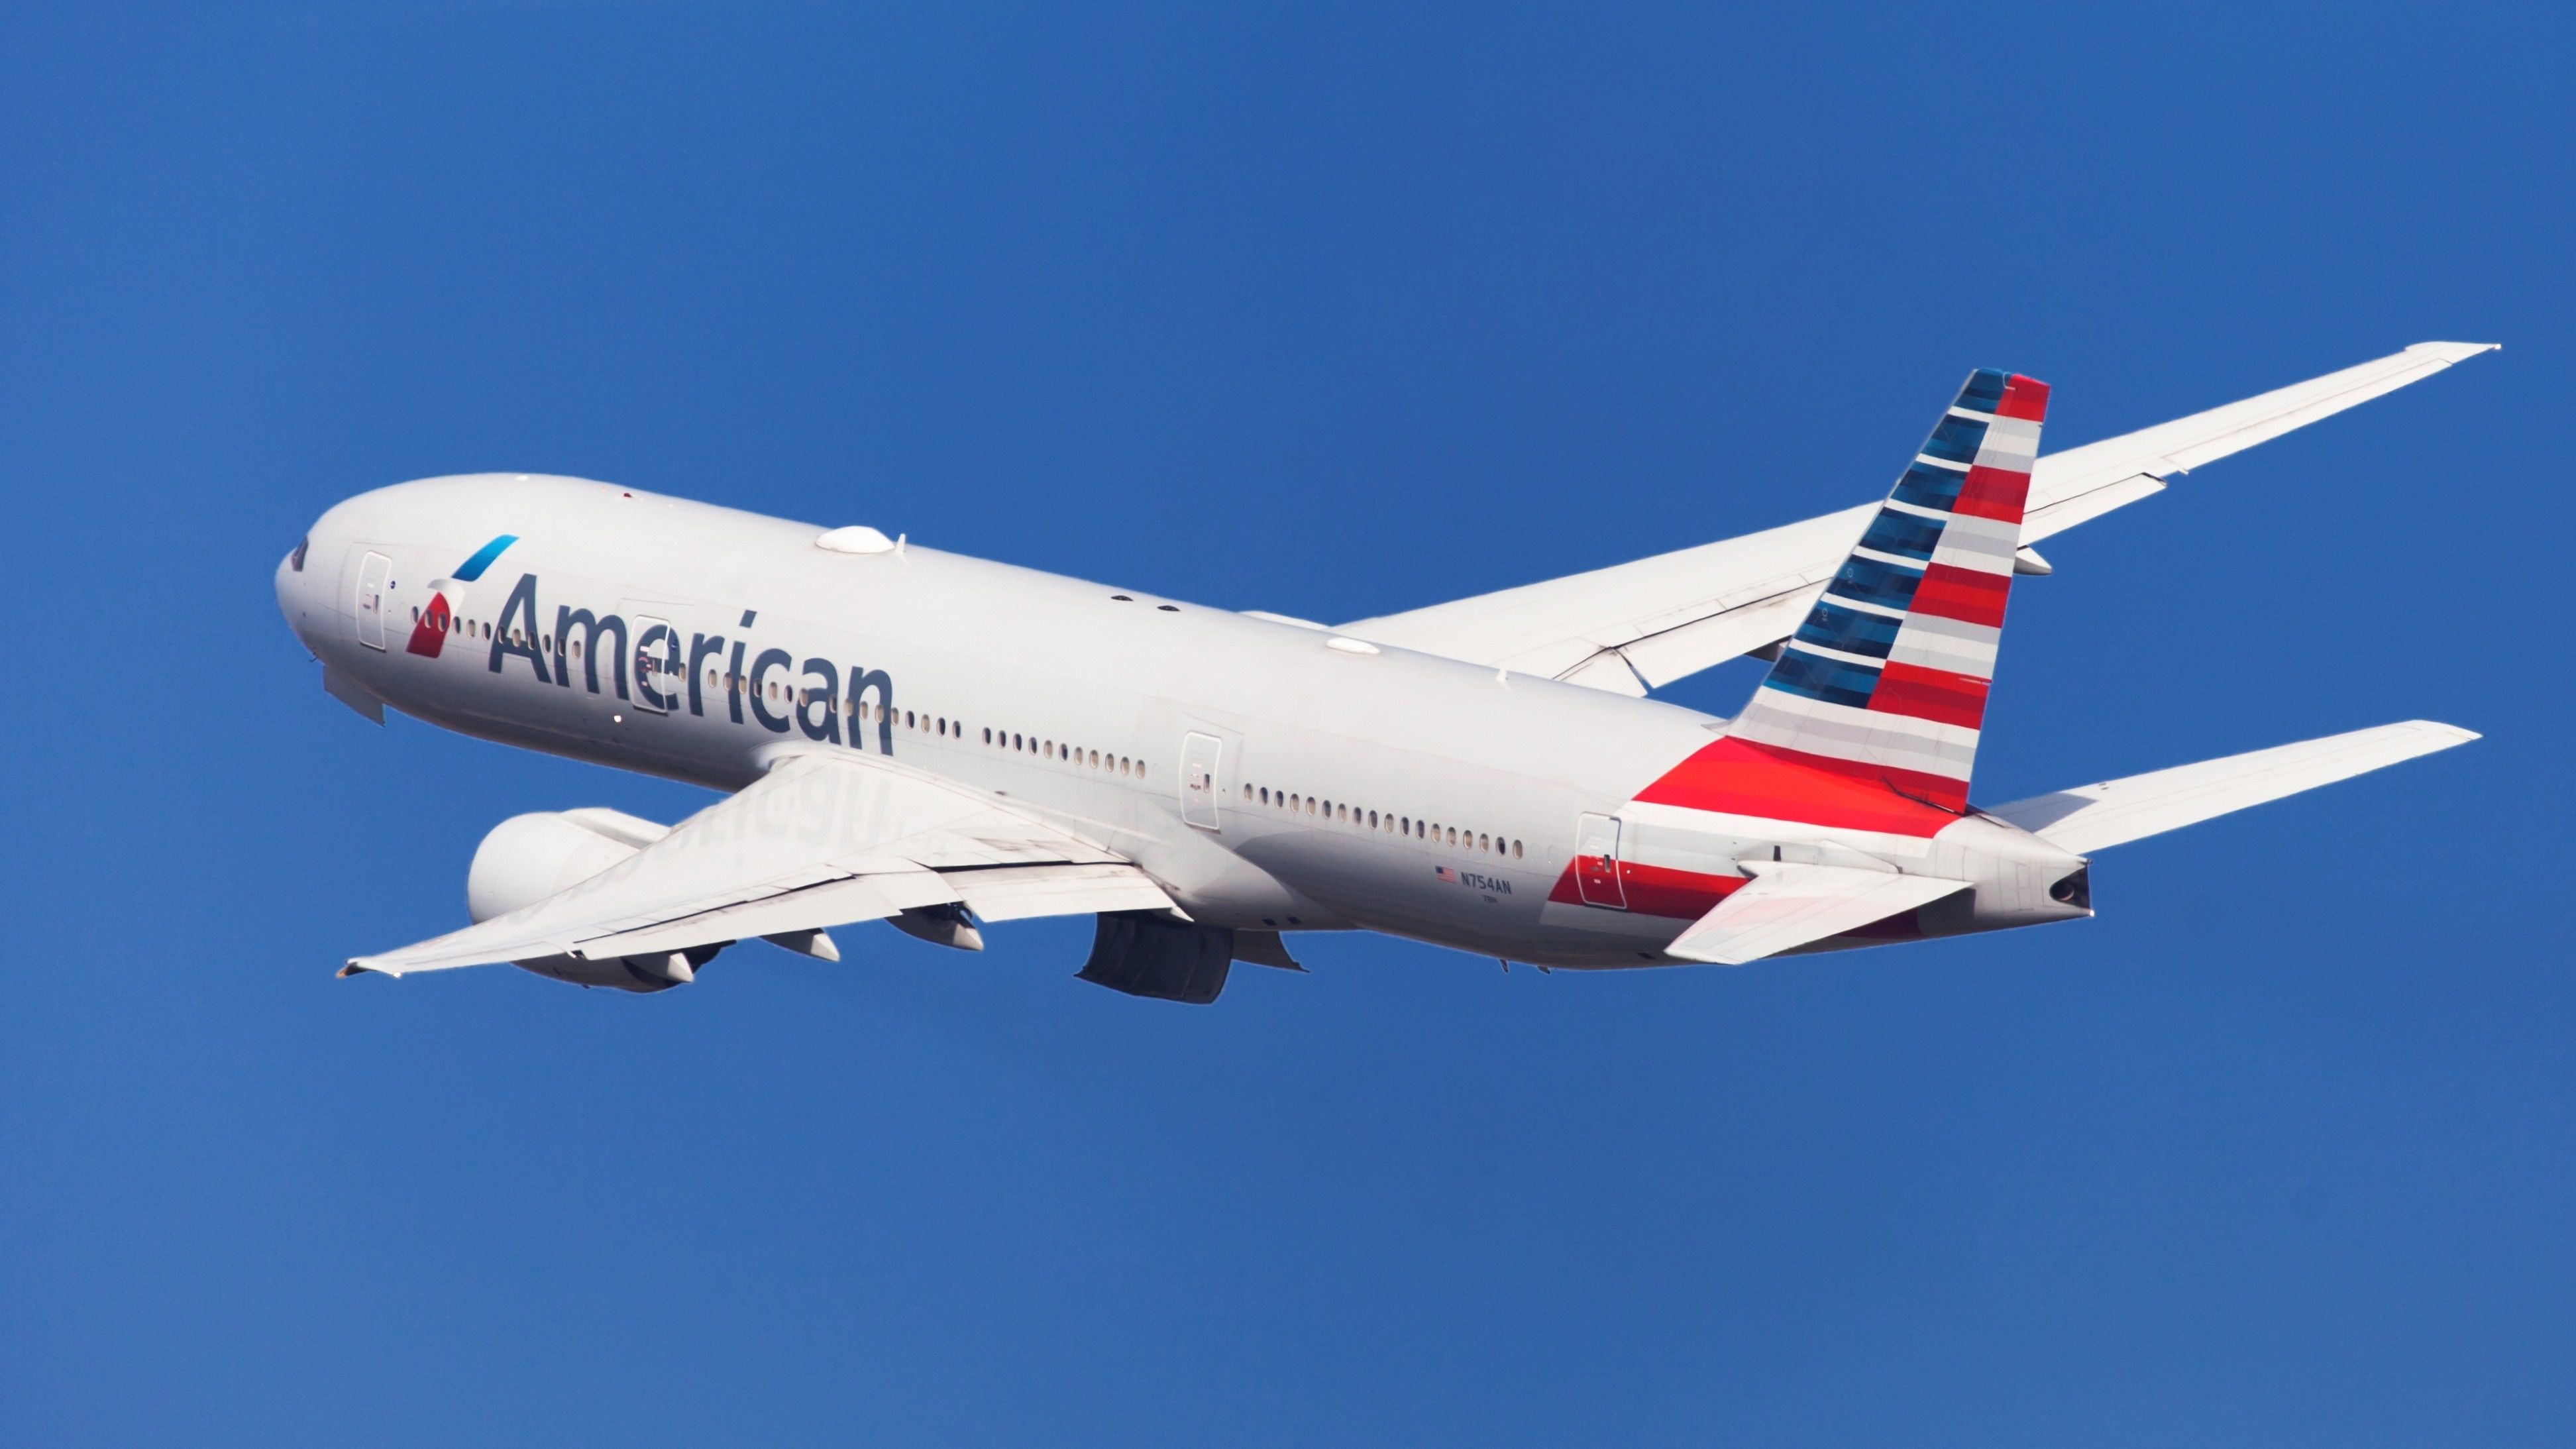 An American Airlines Boeing 777-200ER flying in the sky.